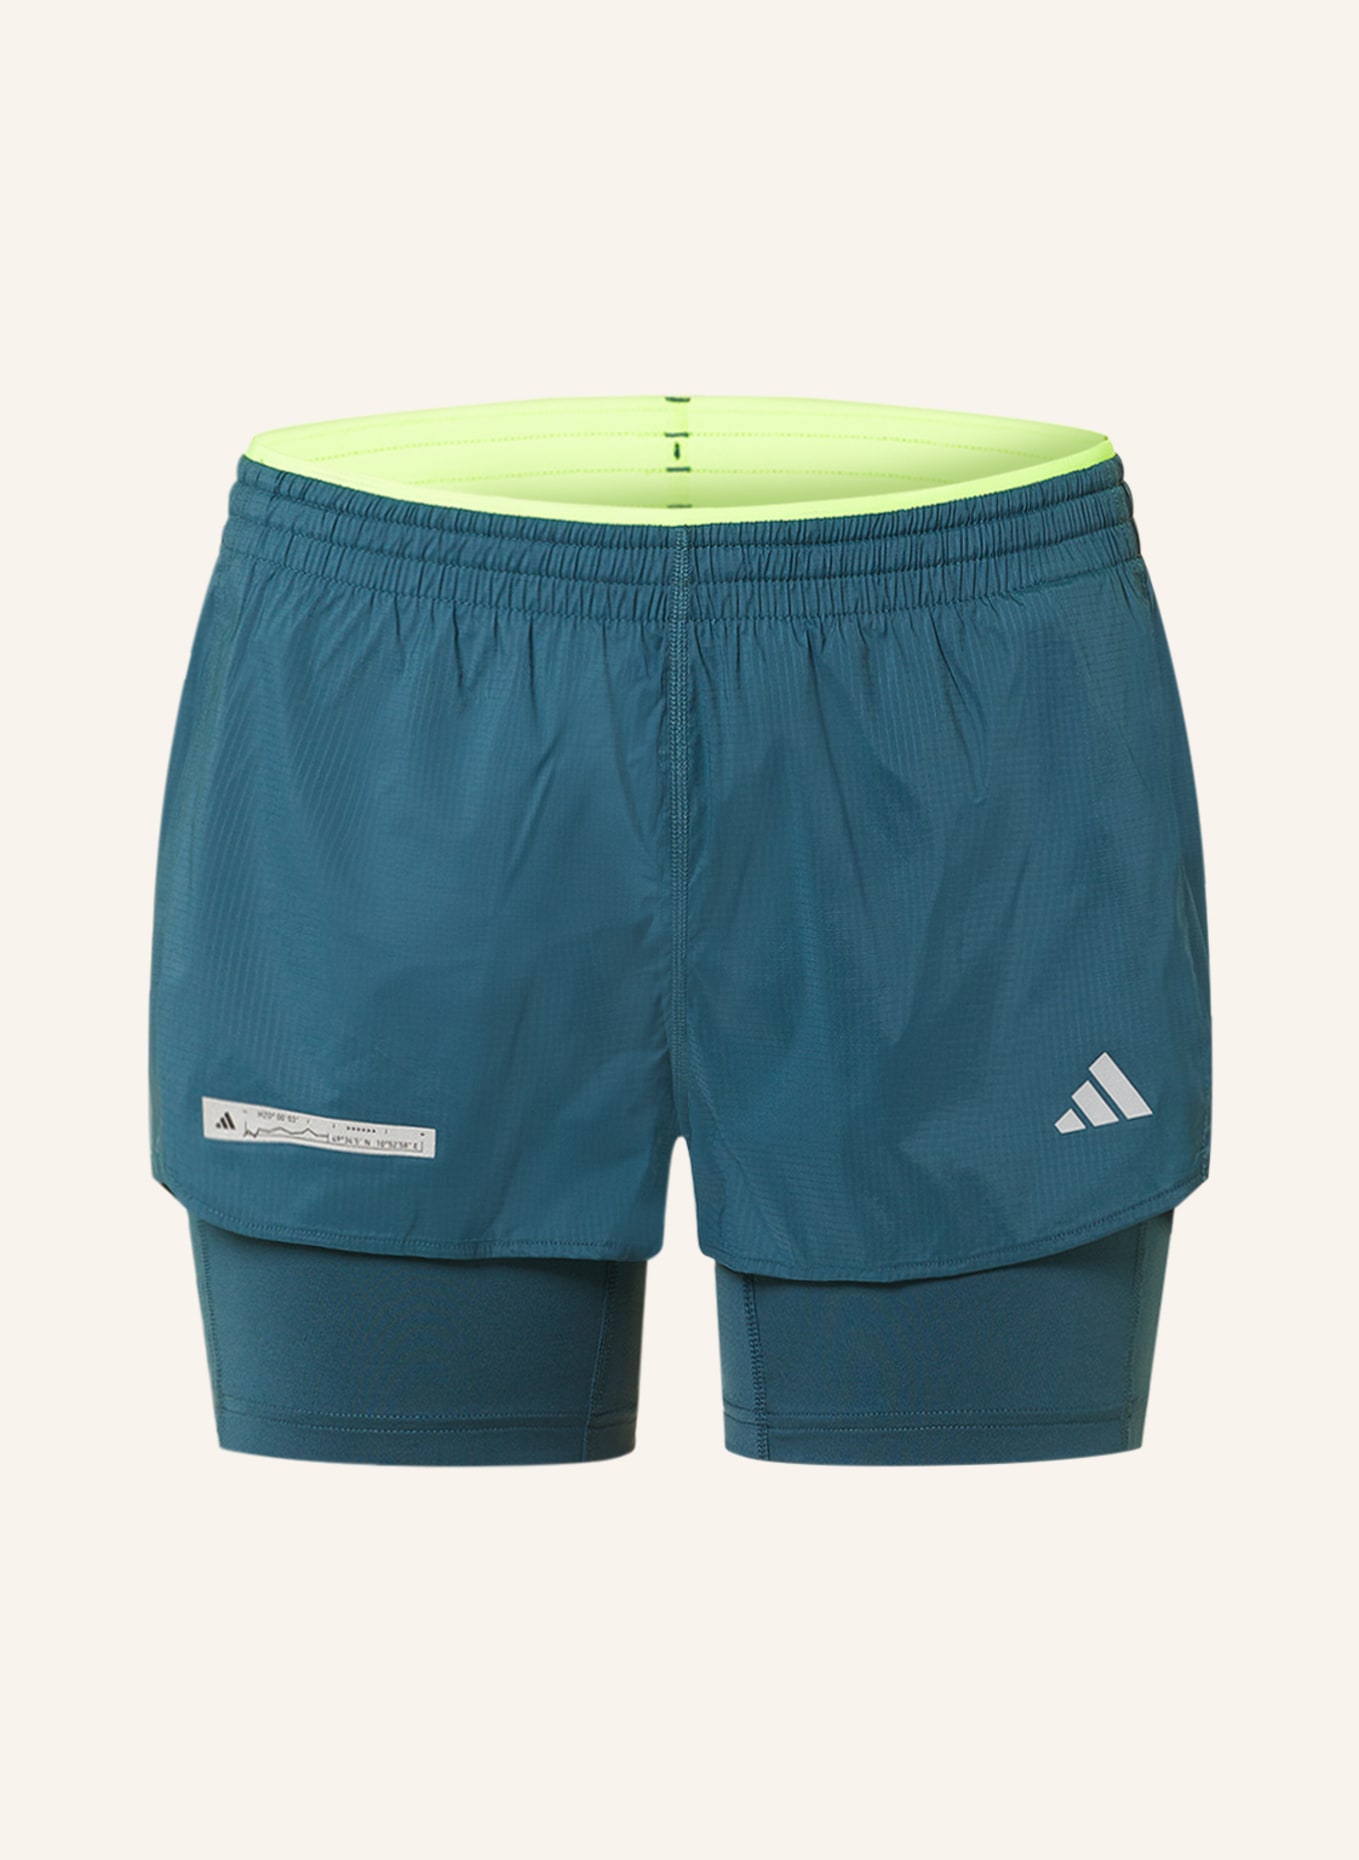 adidas 2-in-1 running shorts ULTIMATE in teal